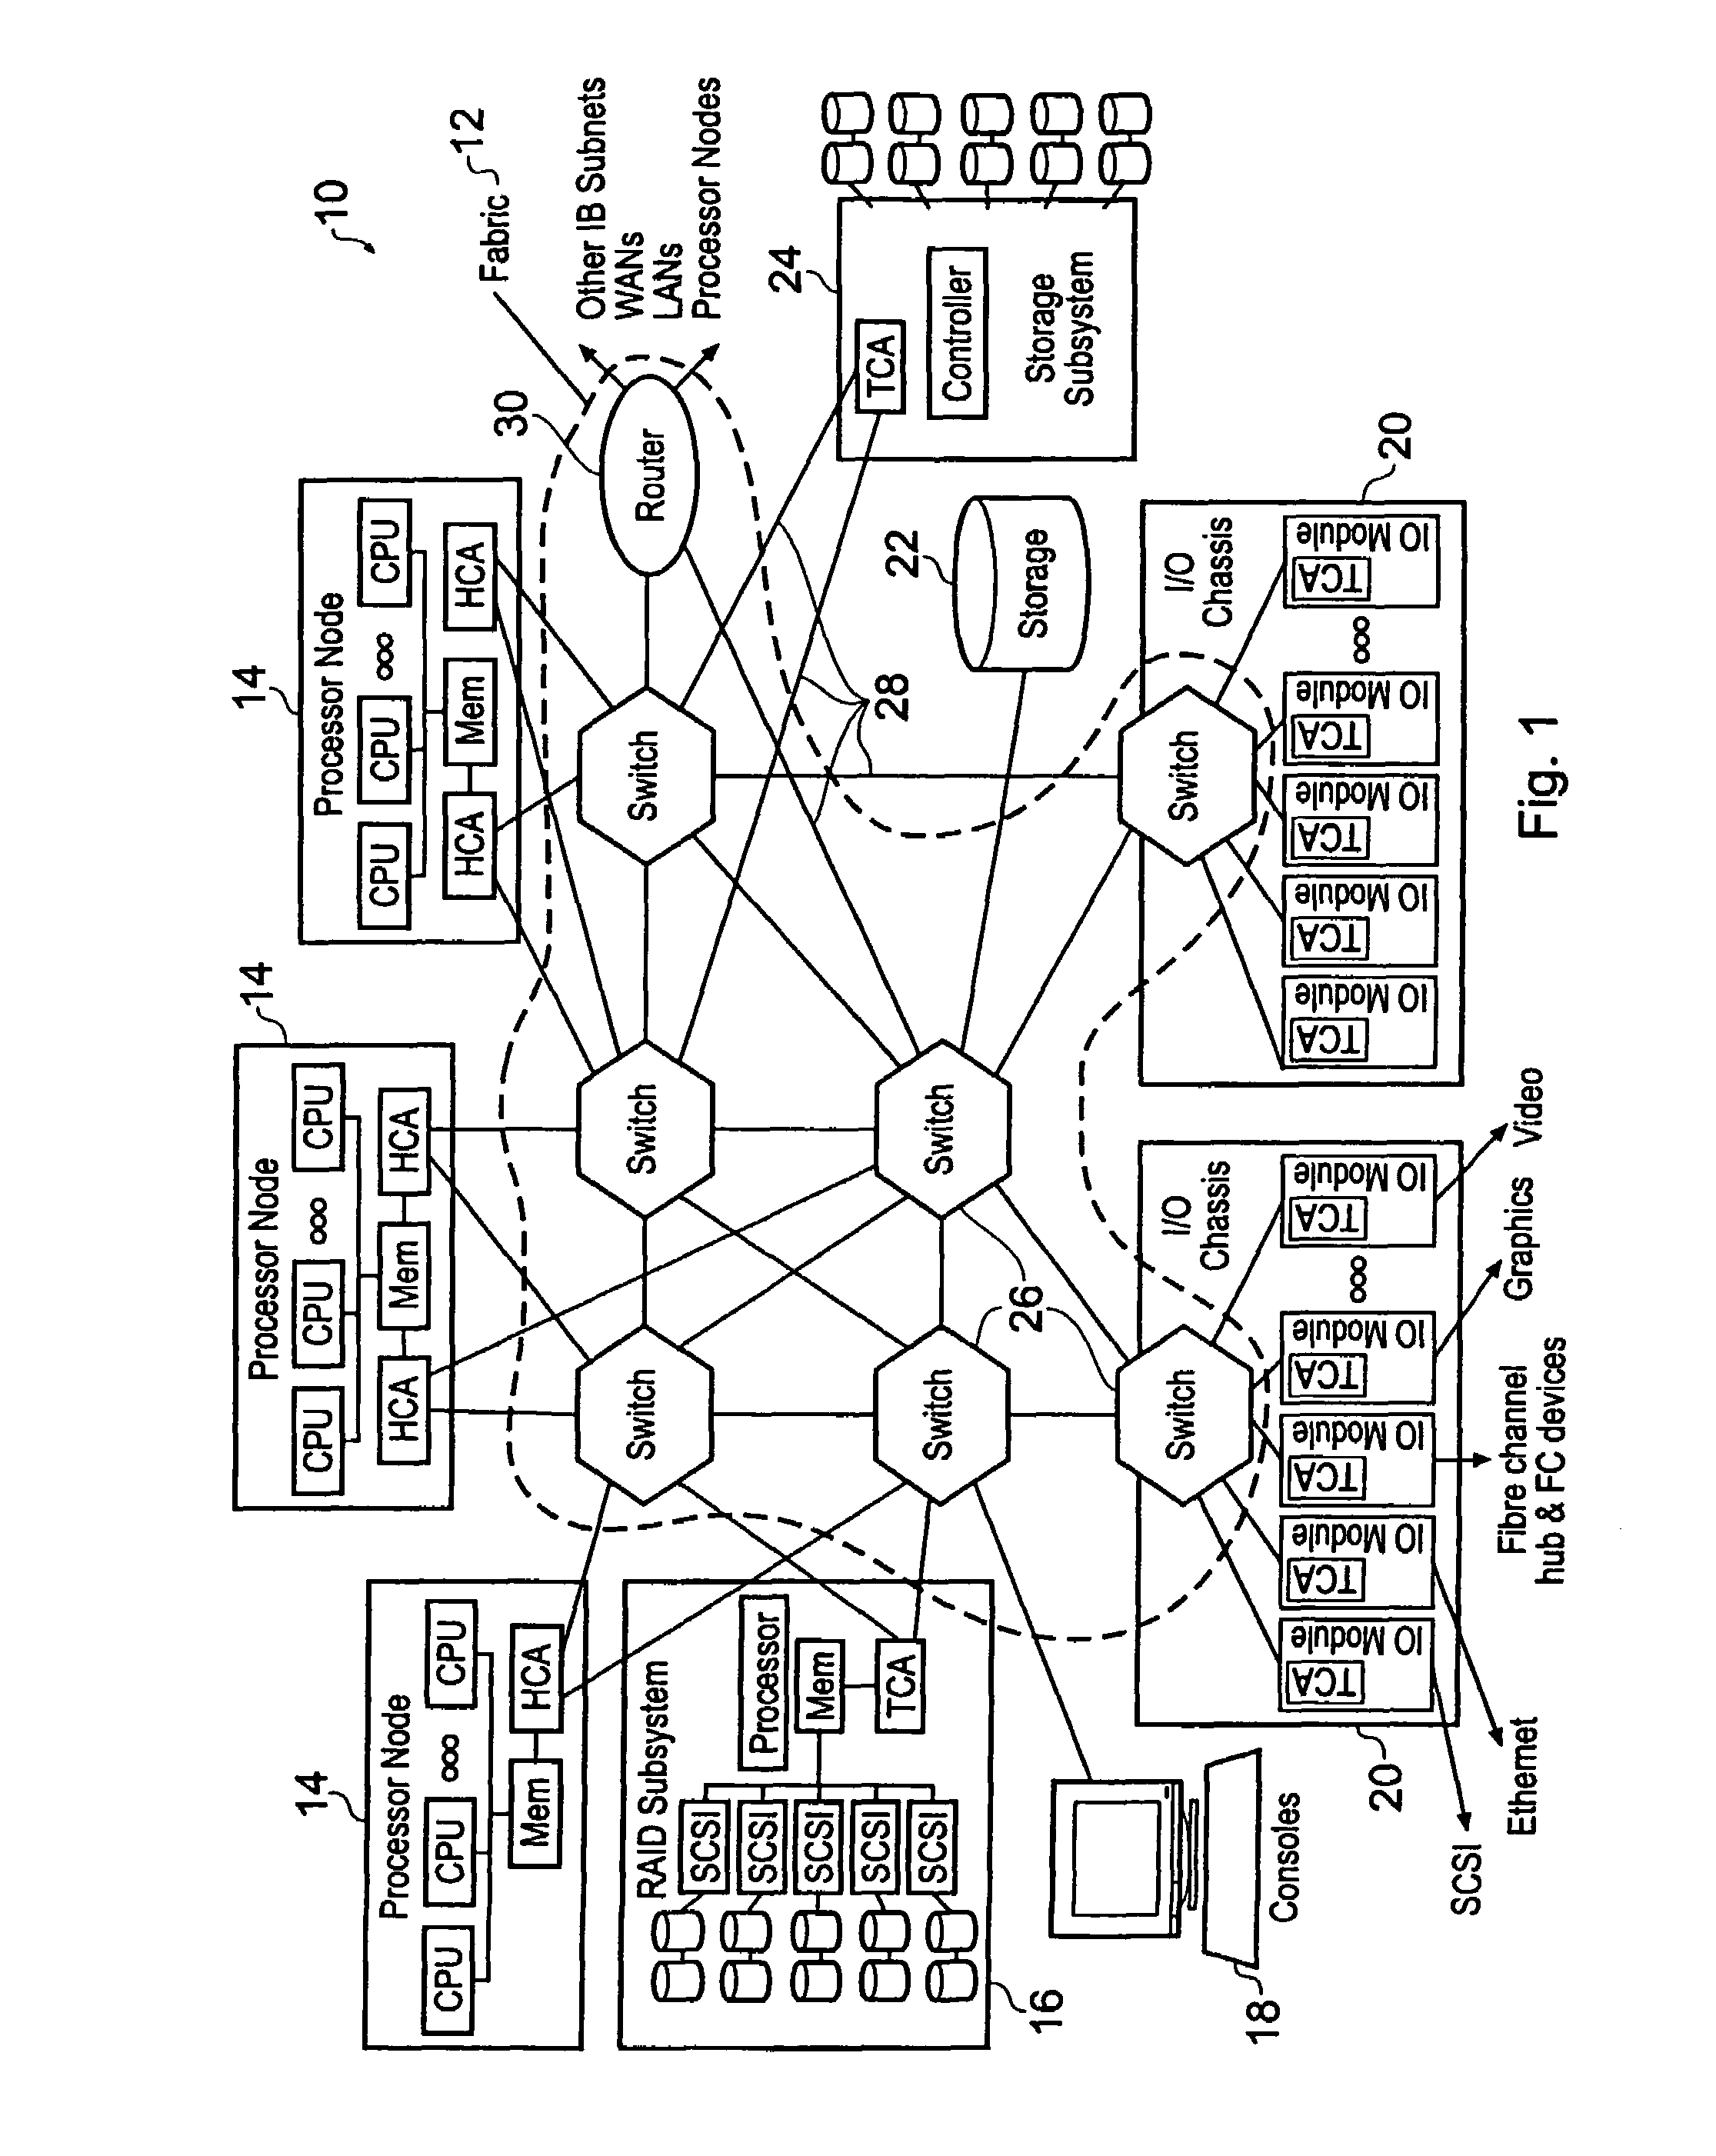 Communications chip having a plurality of logic analysers